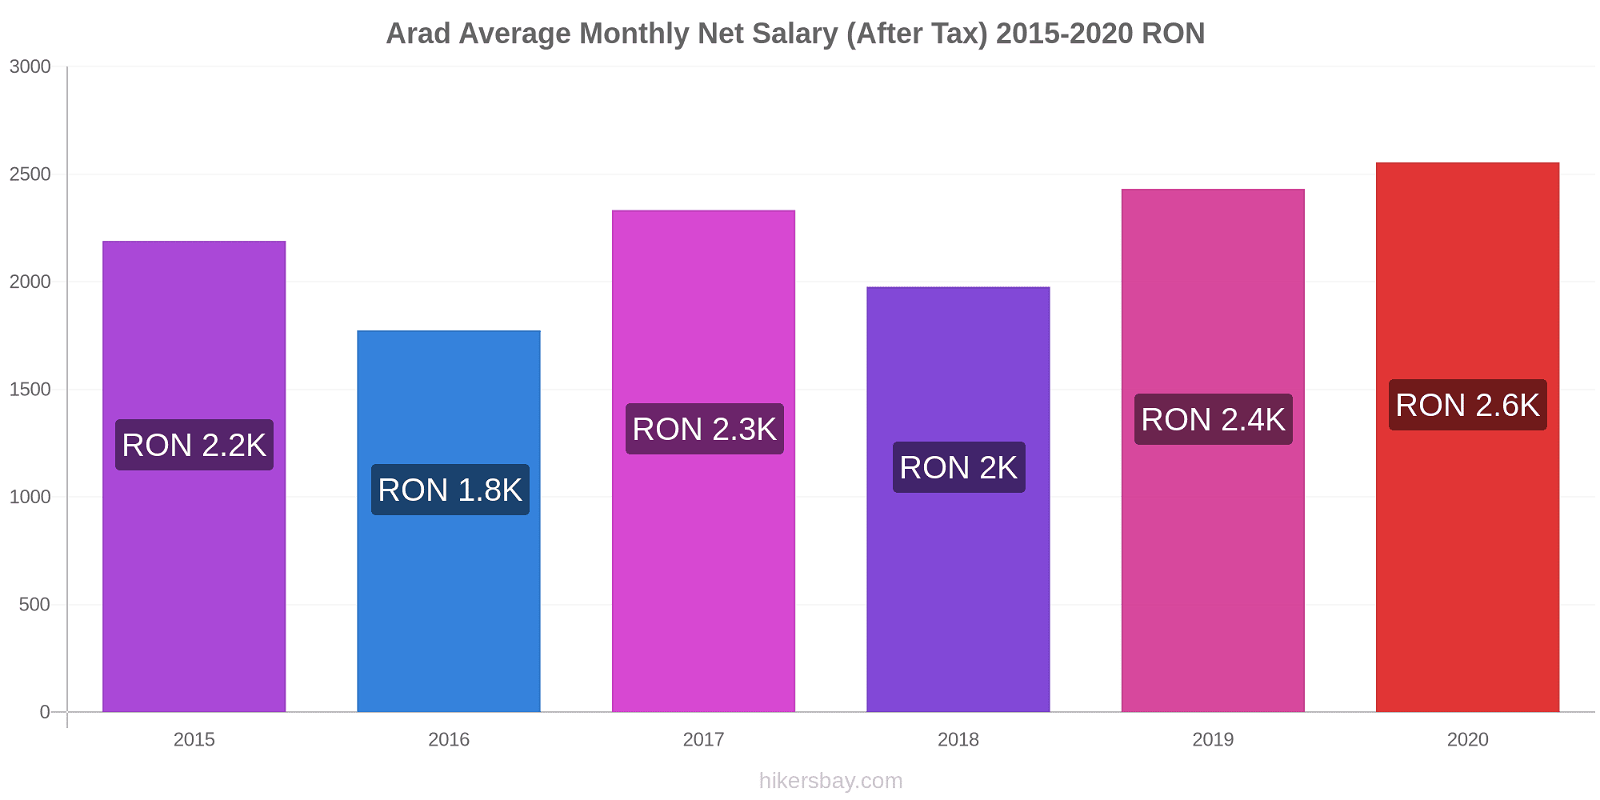 Arad price changes Average Monthly Net Salary (After Tax) hikersbay.com